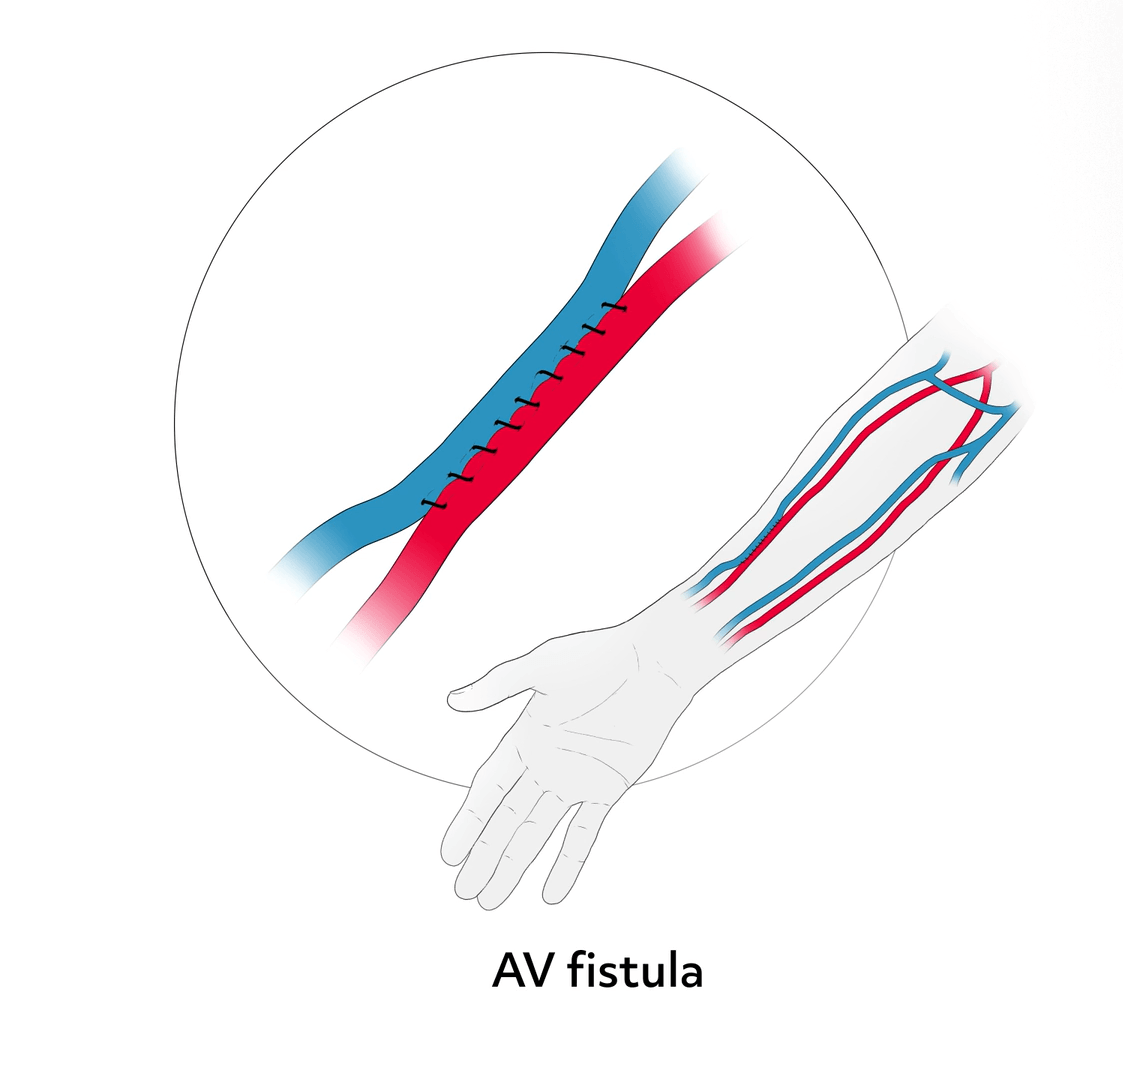 Image of an AV fistula: an artery and vein are sewn together.